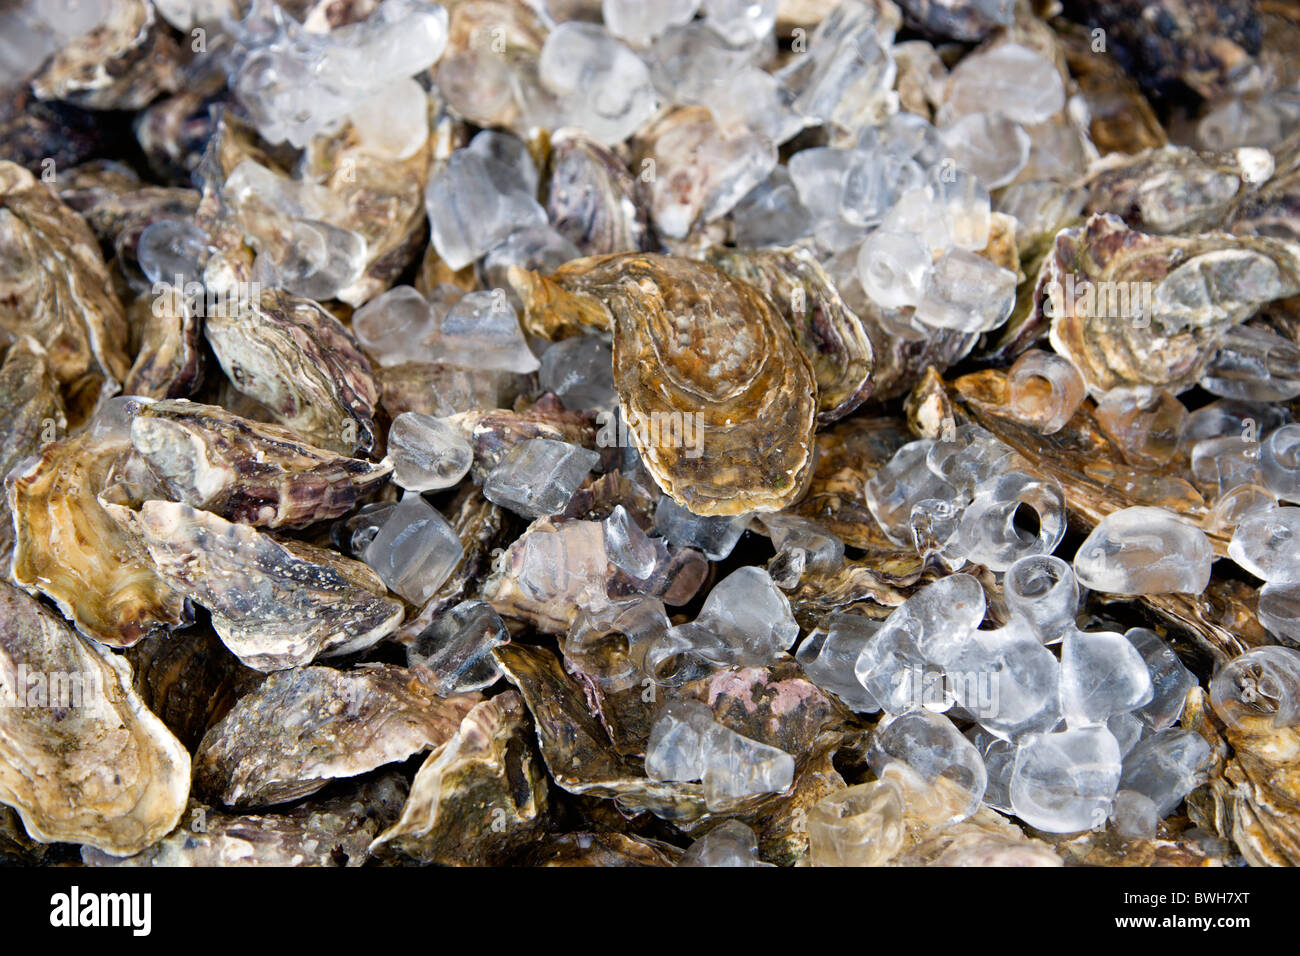 Food, Seafood, Shellfish, Fresh live oysters packed in ice. Stock Photo